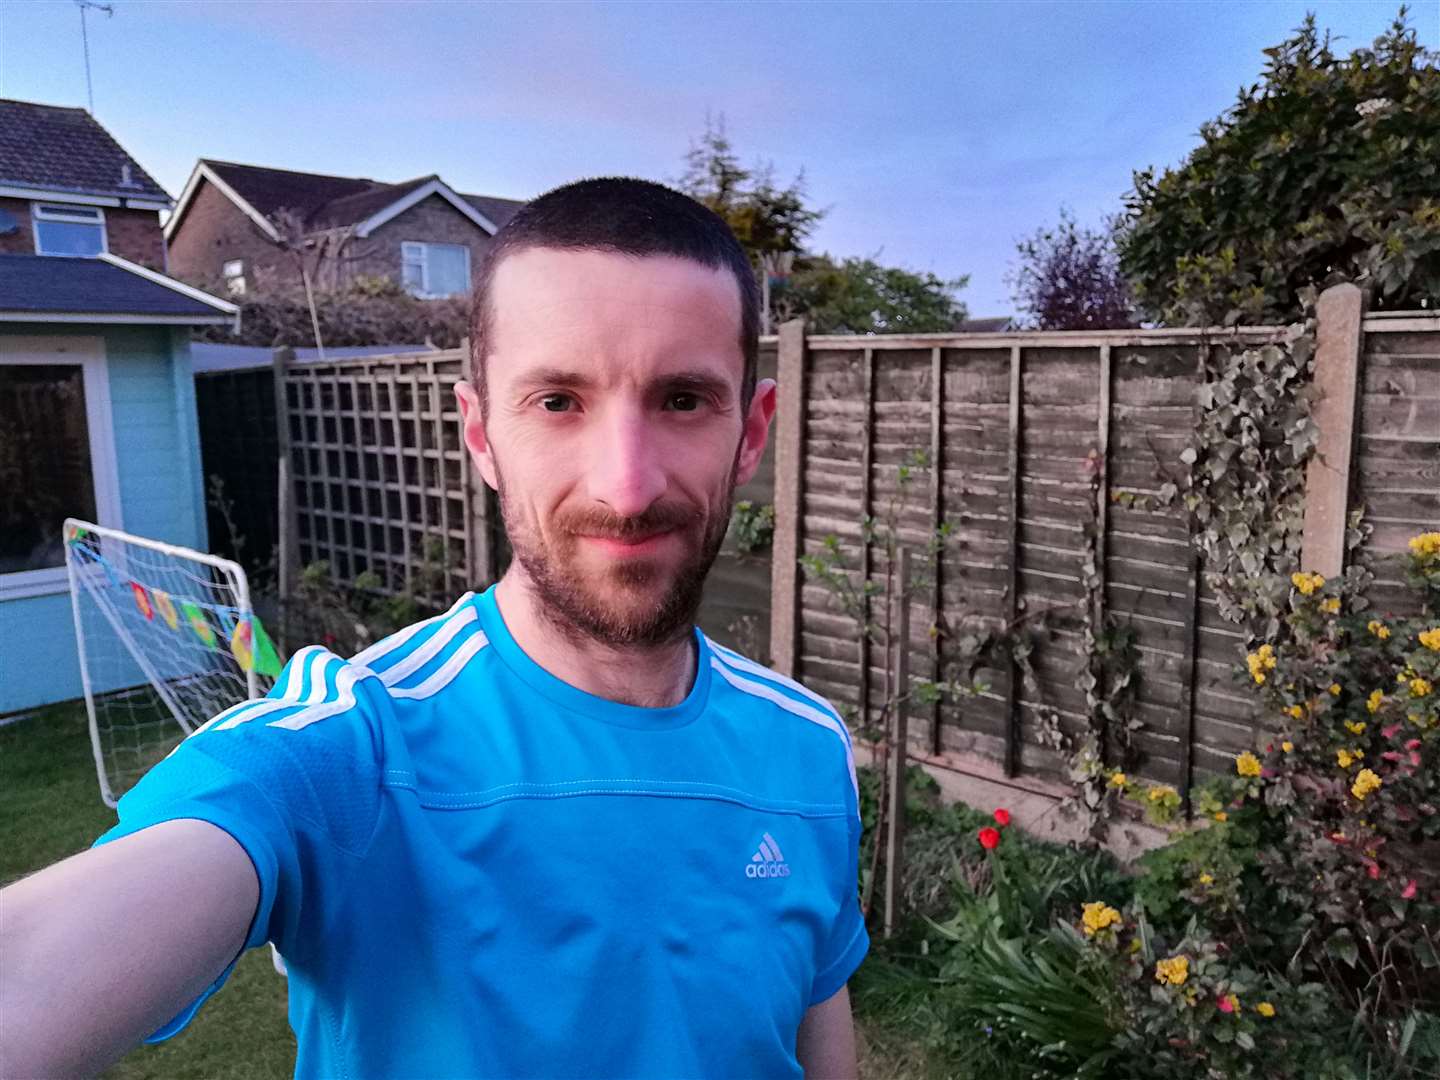 MARATHON MAN: Neil Musgrove putting his best foot forward for an ultra marathon in his back garden in Leeds. Picture: Neil Musgrove / Submitted by Leeds Cares.